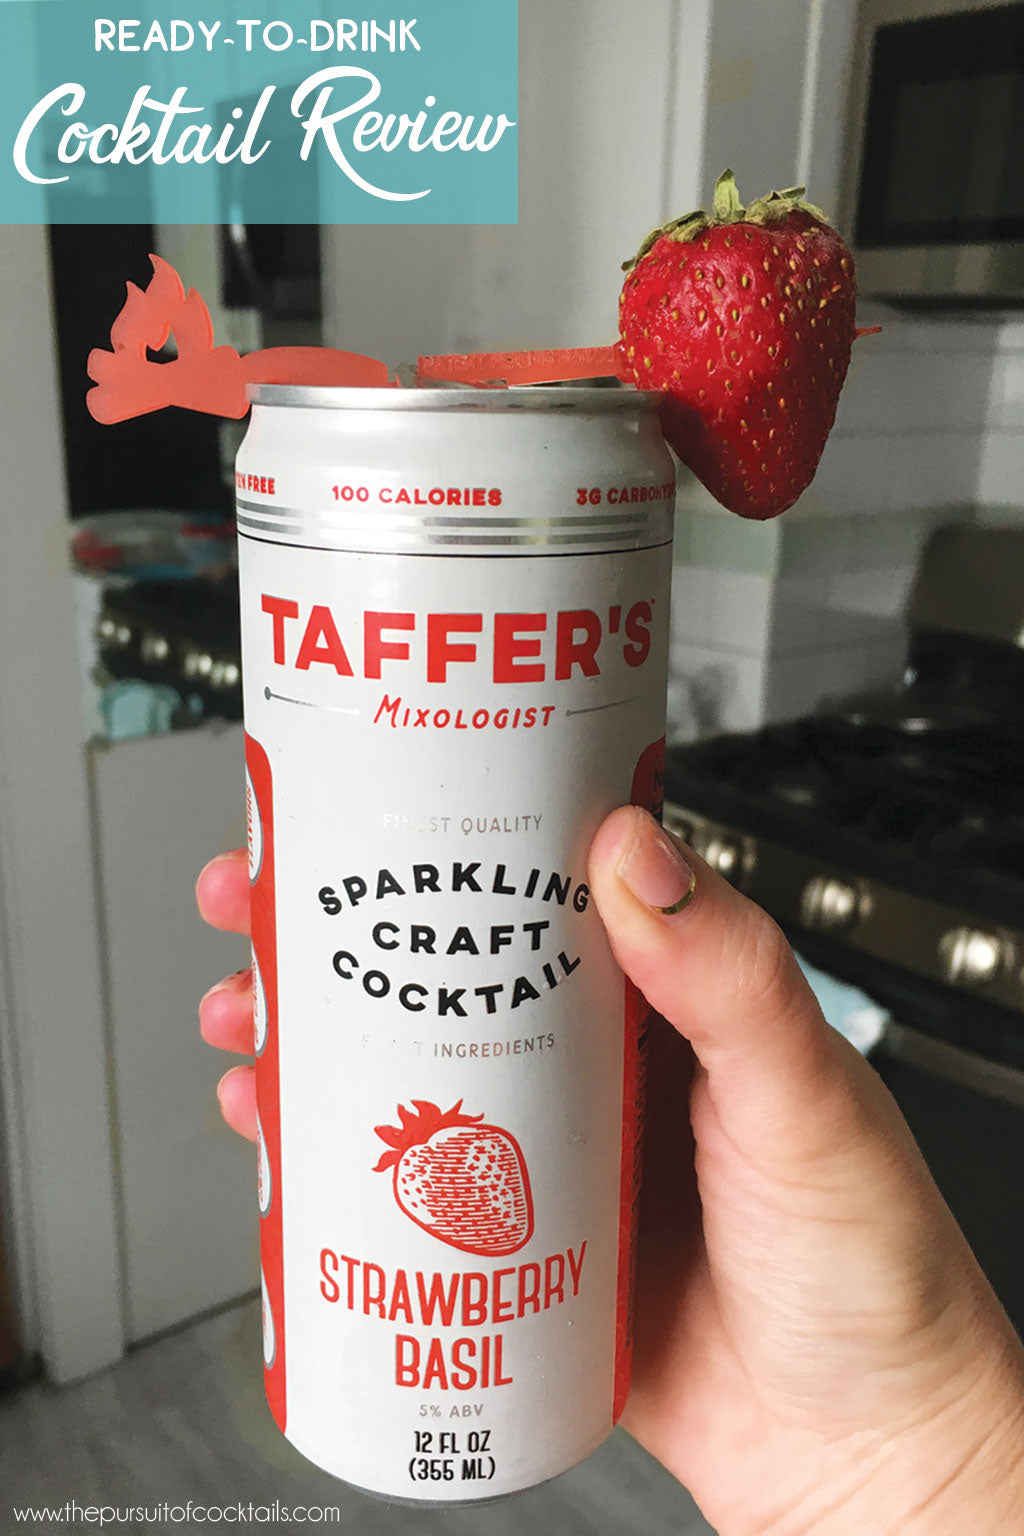 Canned cocktail review of Taffer's Mixologist sparkling cocktails